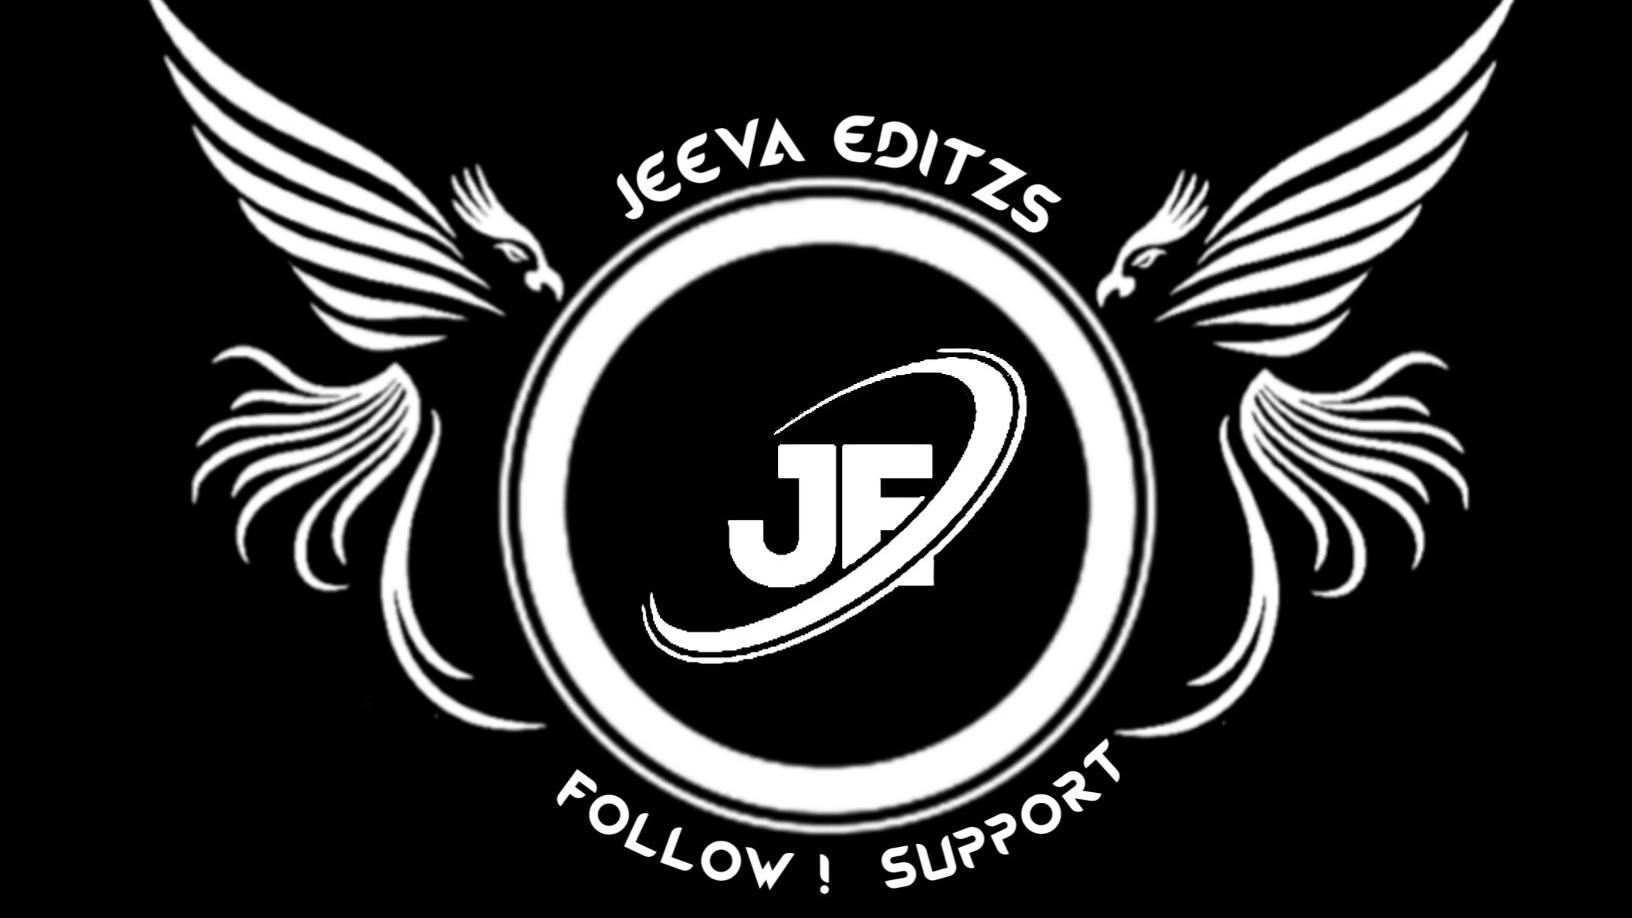  A black and white logo of Jeeva Editz with the text 'Follow, Support' and 'Jeeva Editz' inside a circle with wings on either side. The logo is related to the search query 'WhatsApp status viewing trick'.